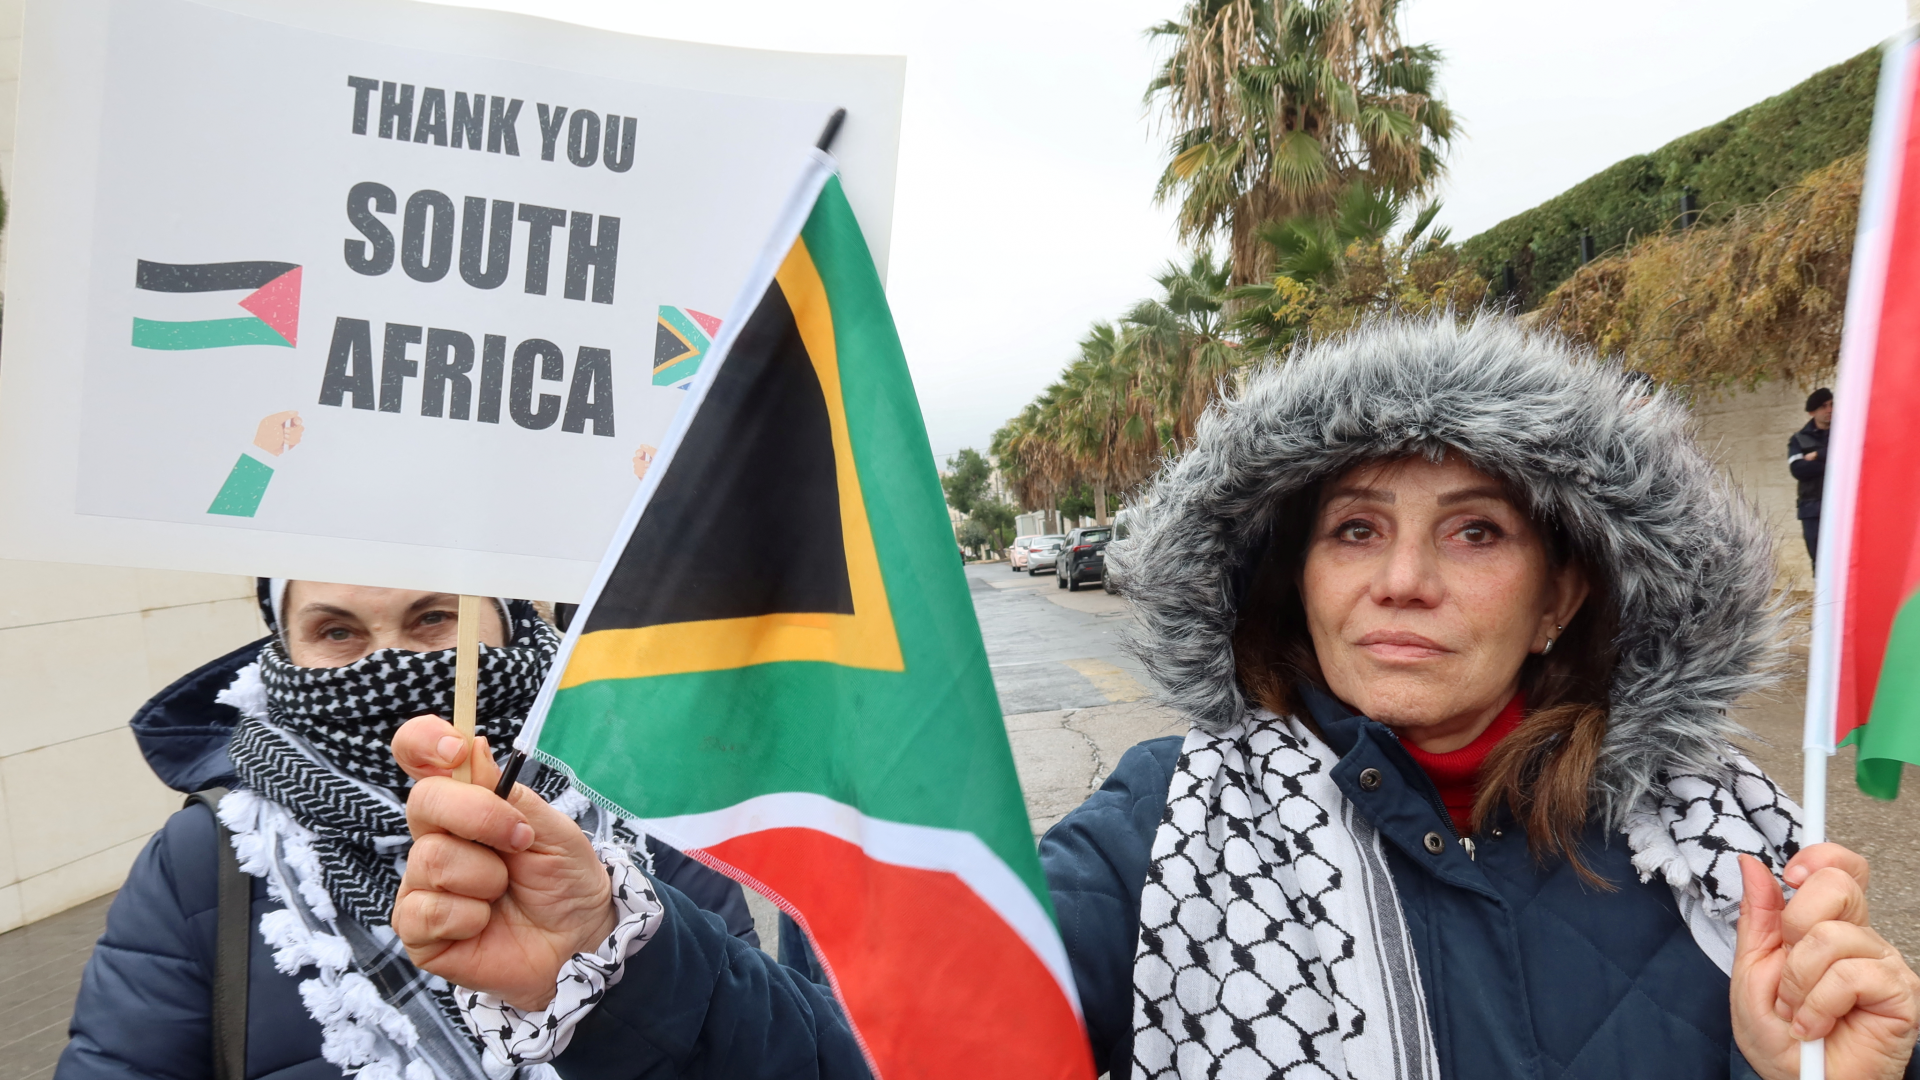 A demonstrator holds a South African flag in support of its case against Israel at the International Court of Justice (ICJ) in the Hague during a protest in Amman, Jordan, on 11 January 2024 (Jehad Shelbak/Reuters)